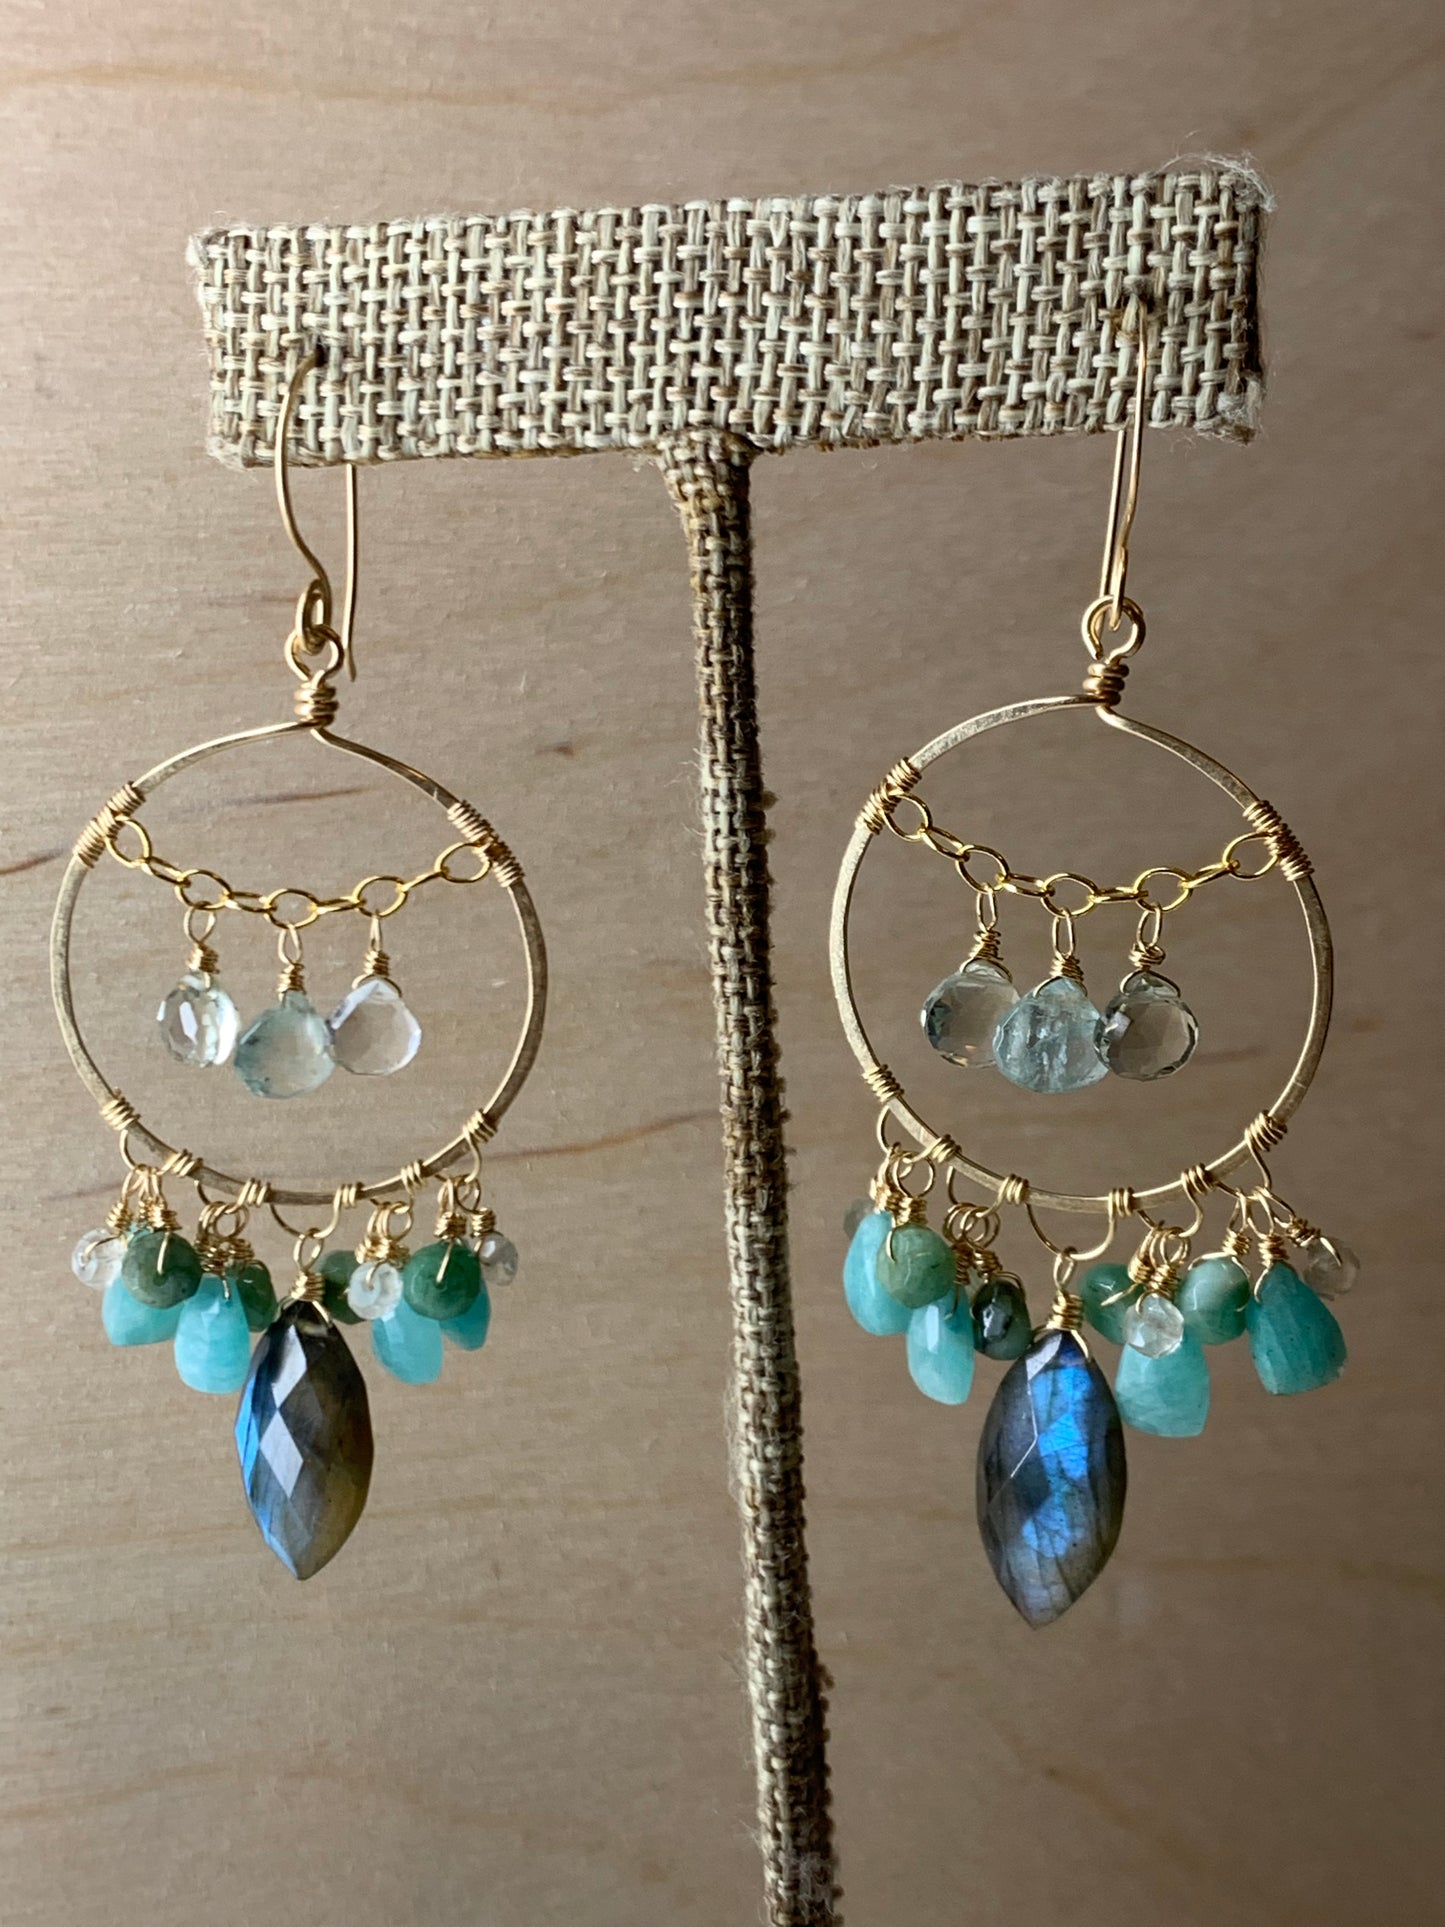 Faceted Labradorites 14kt Gold Filled Earrings, Amazonite. Emeralds. Aquamarine, Green Amethysts,